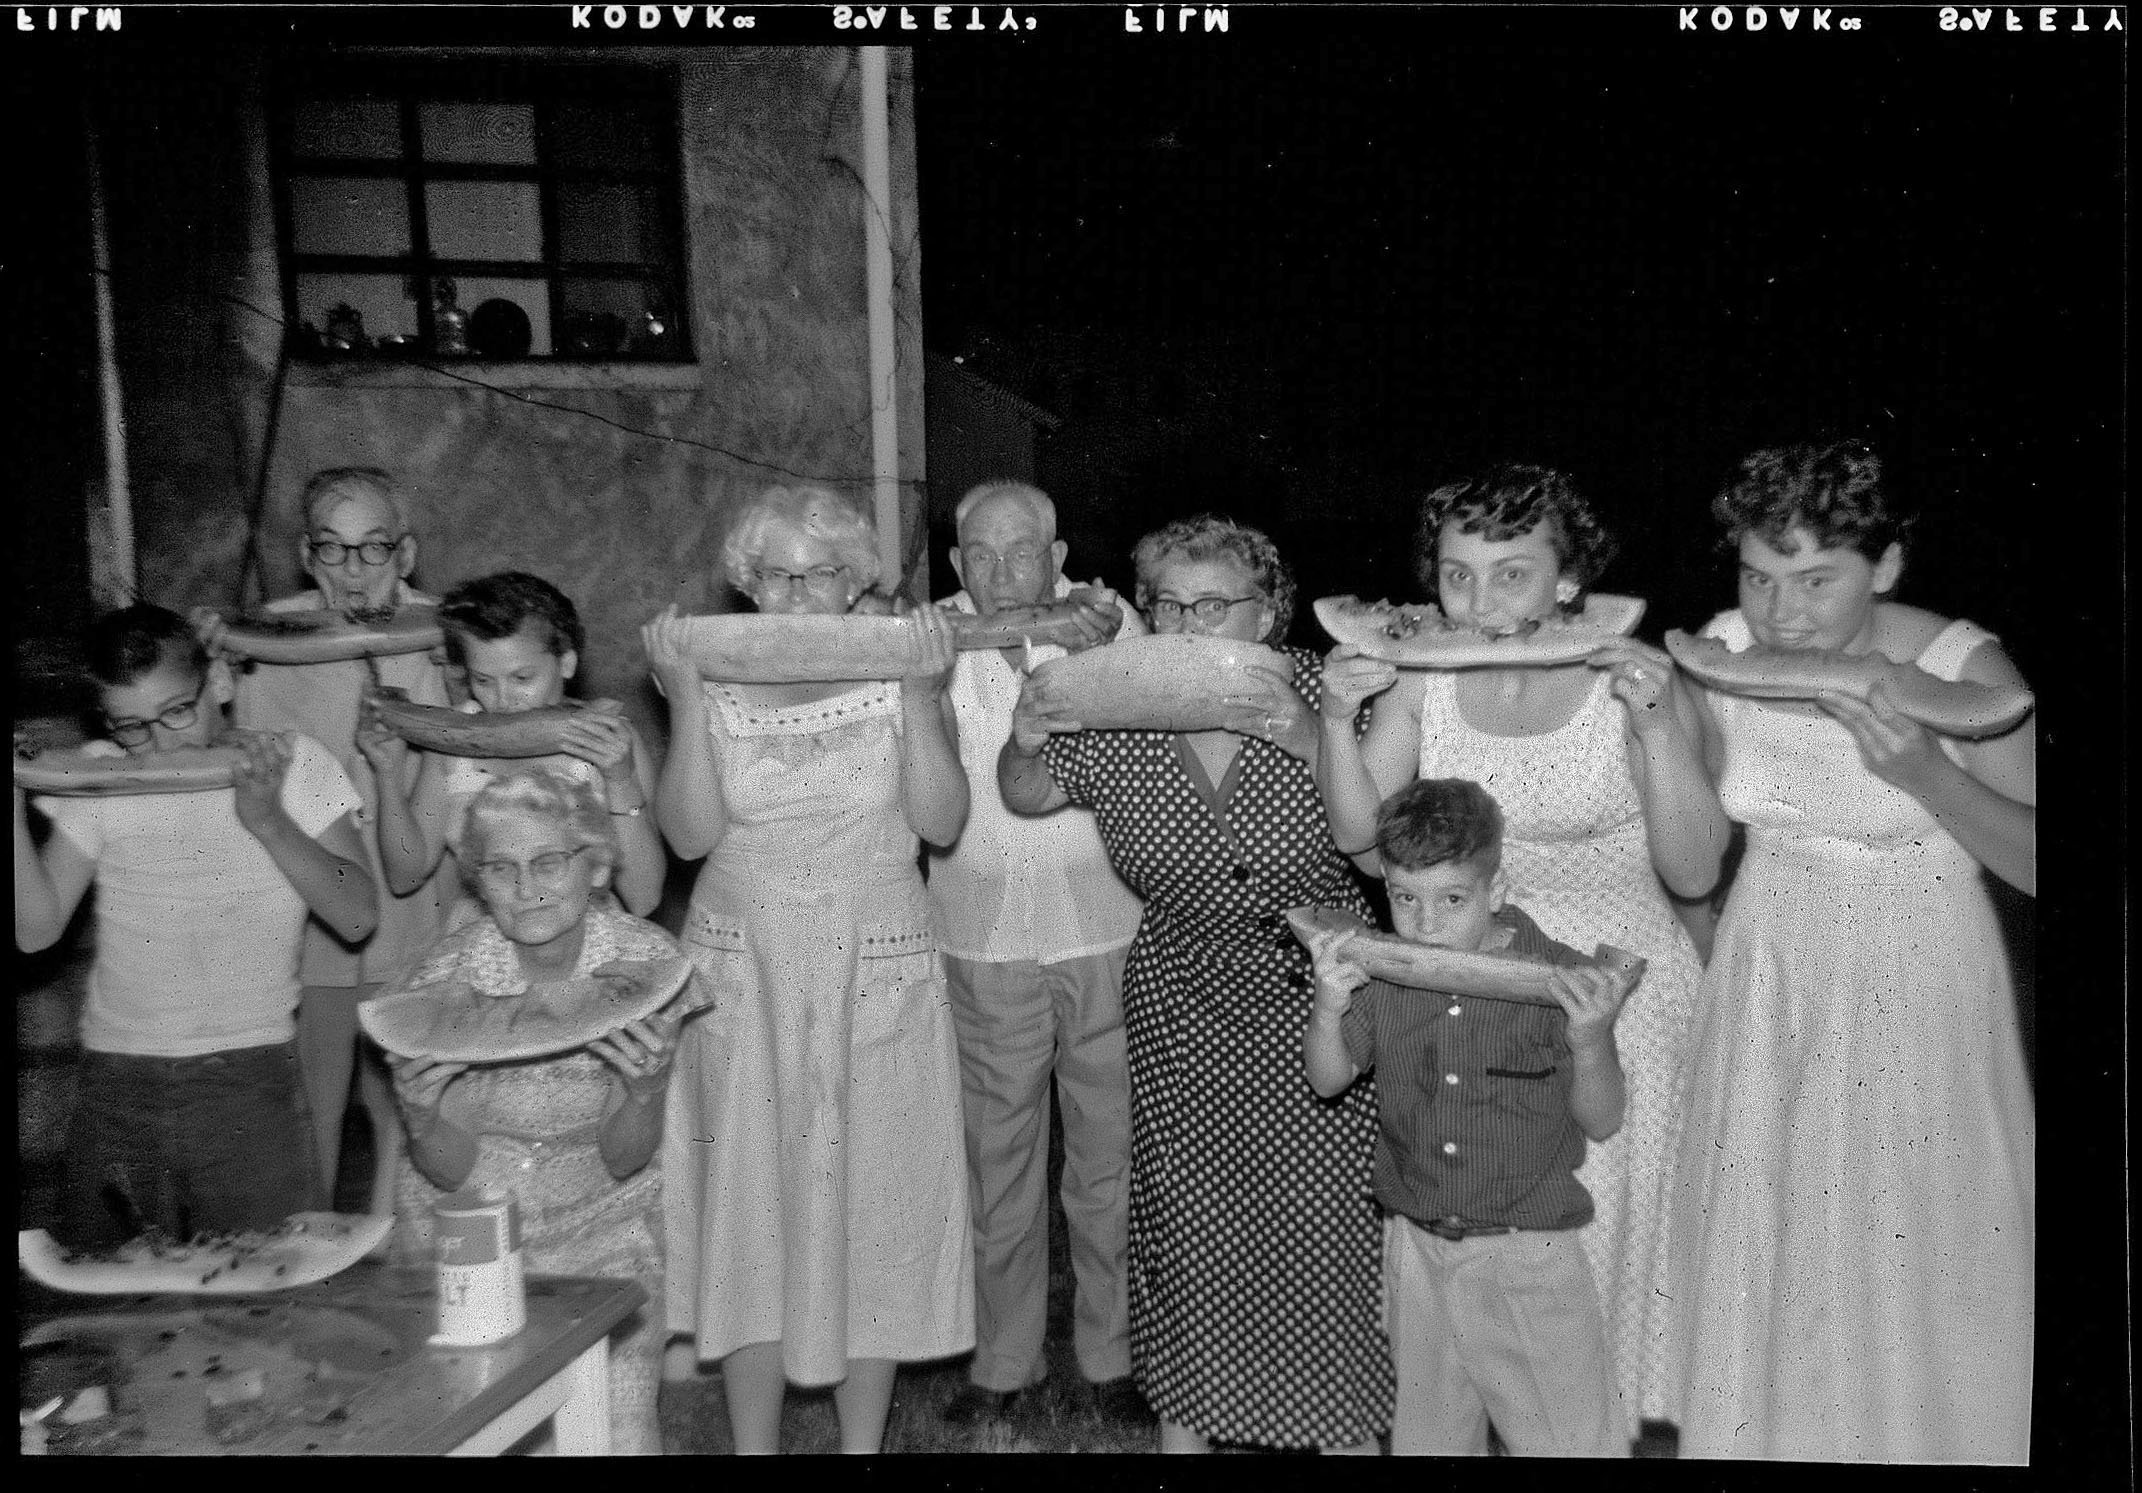 1957-1958. All relatives from my father's side.  Far left is my aunt Judy (as seen in my previous post "Uncle Butch and Aunt Judy"), next to her is my grandmother, below her is my father Roger, and the far left of the negative is my uncle Jack (as seen in another post with the shark jaws). View full size.